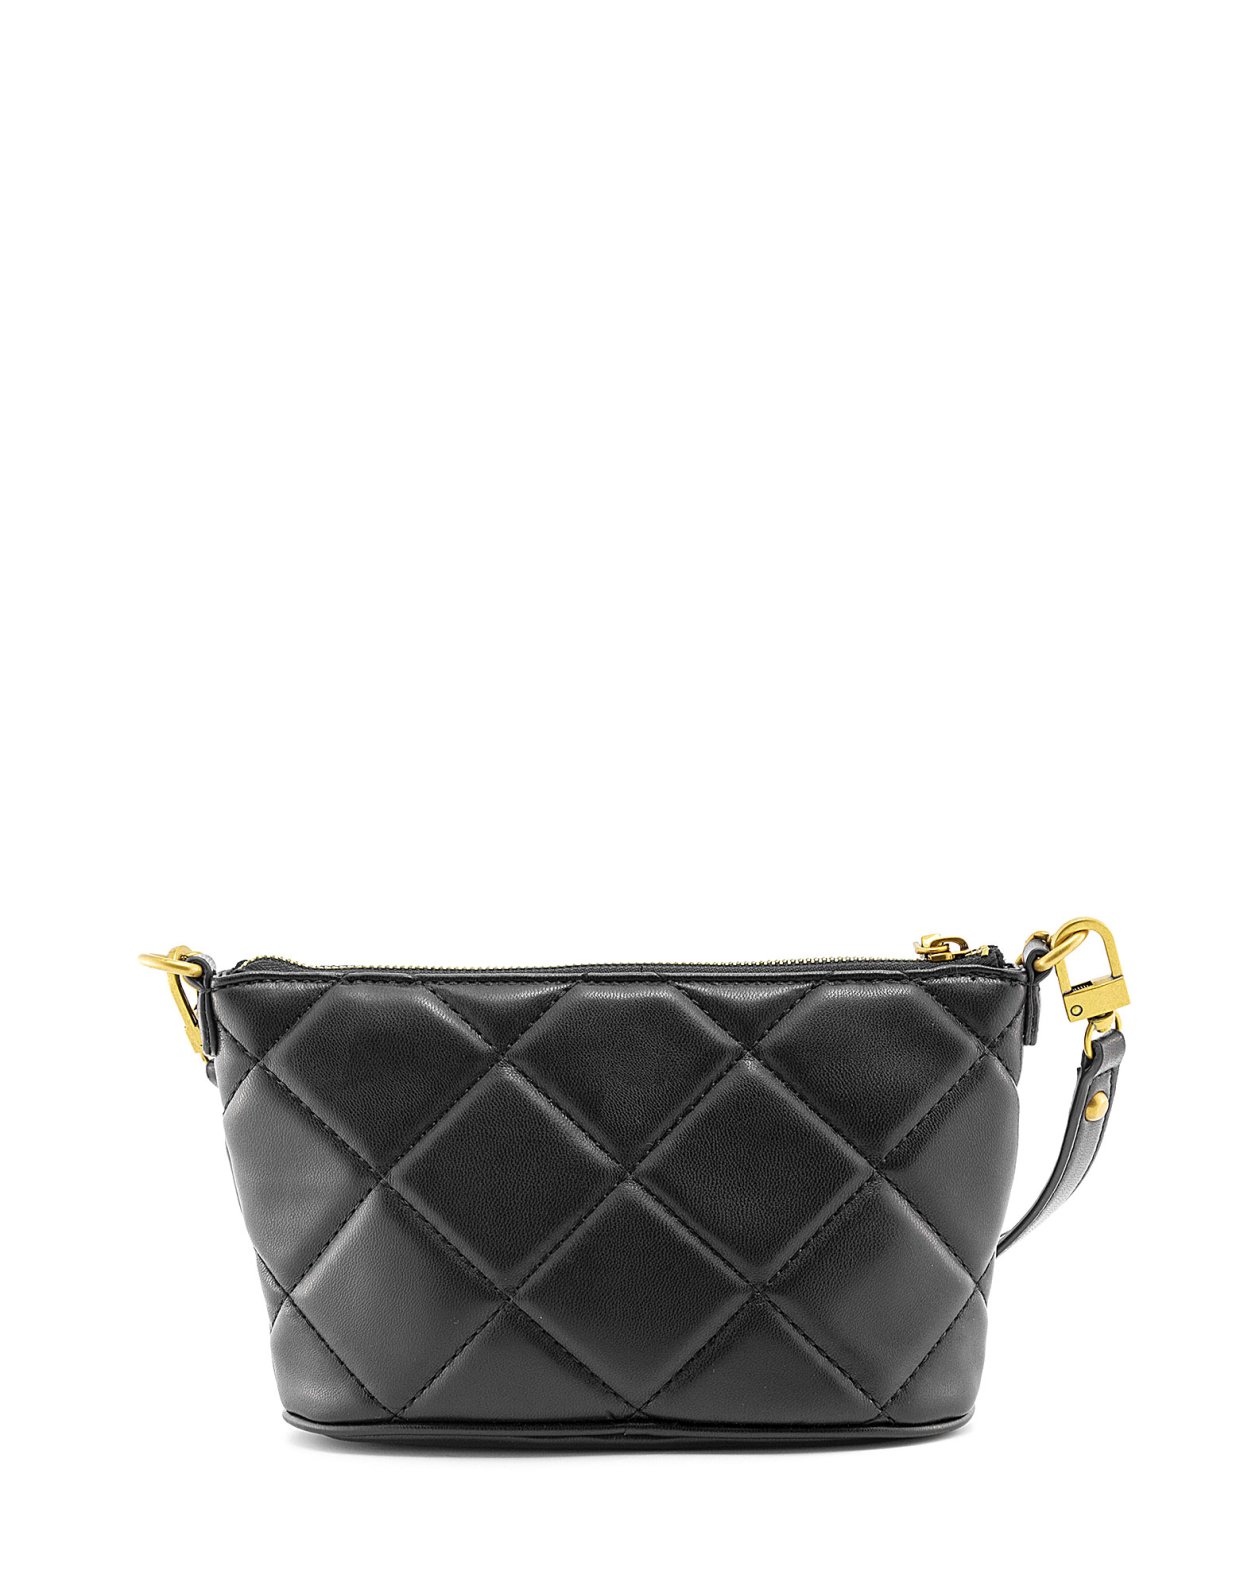 Guess Cessily bucket bag black